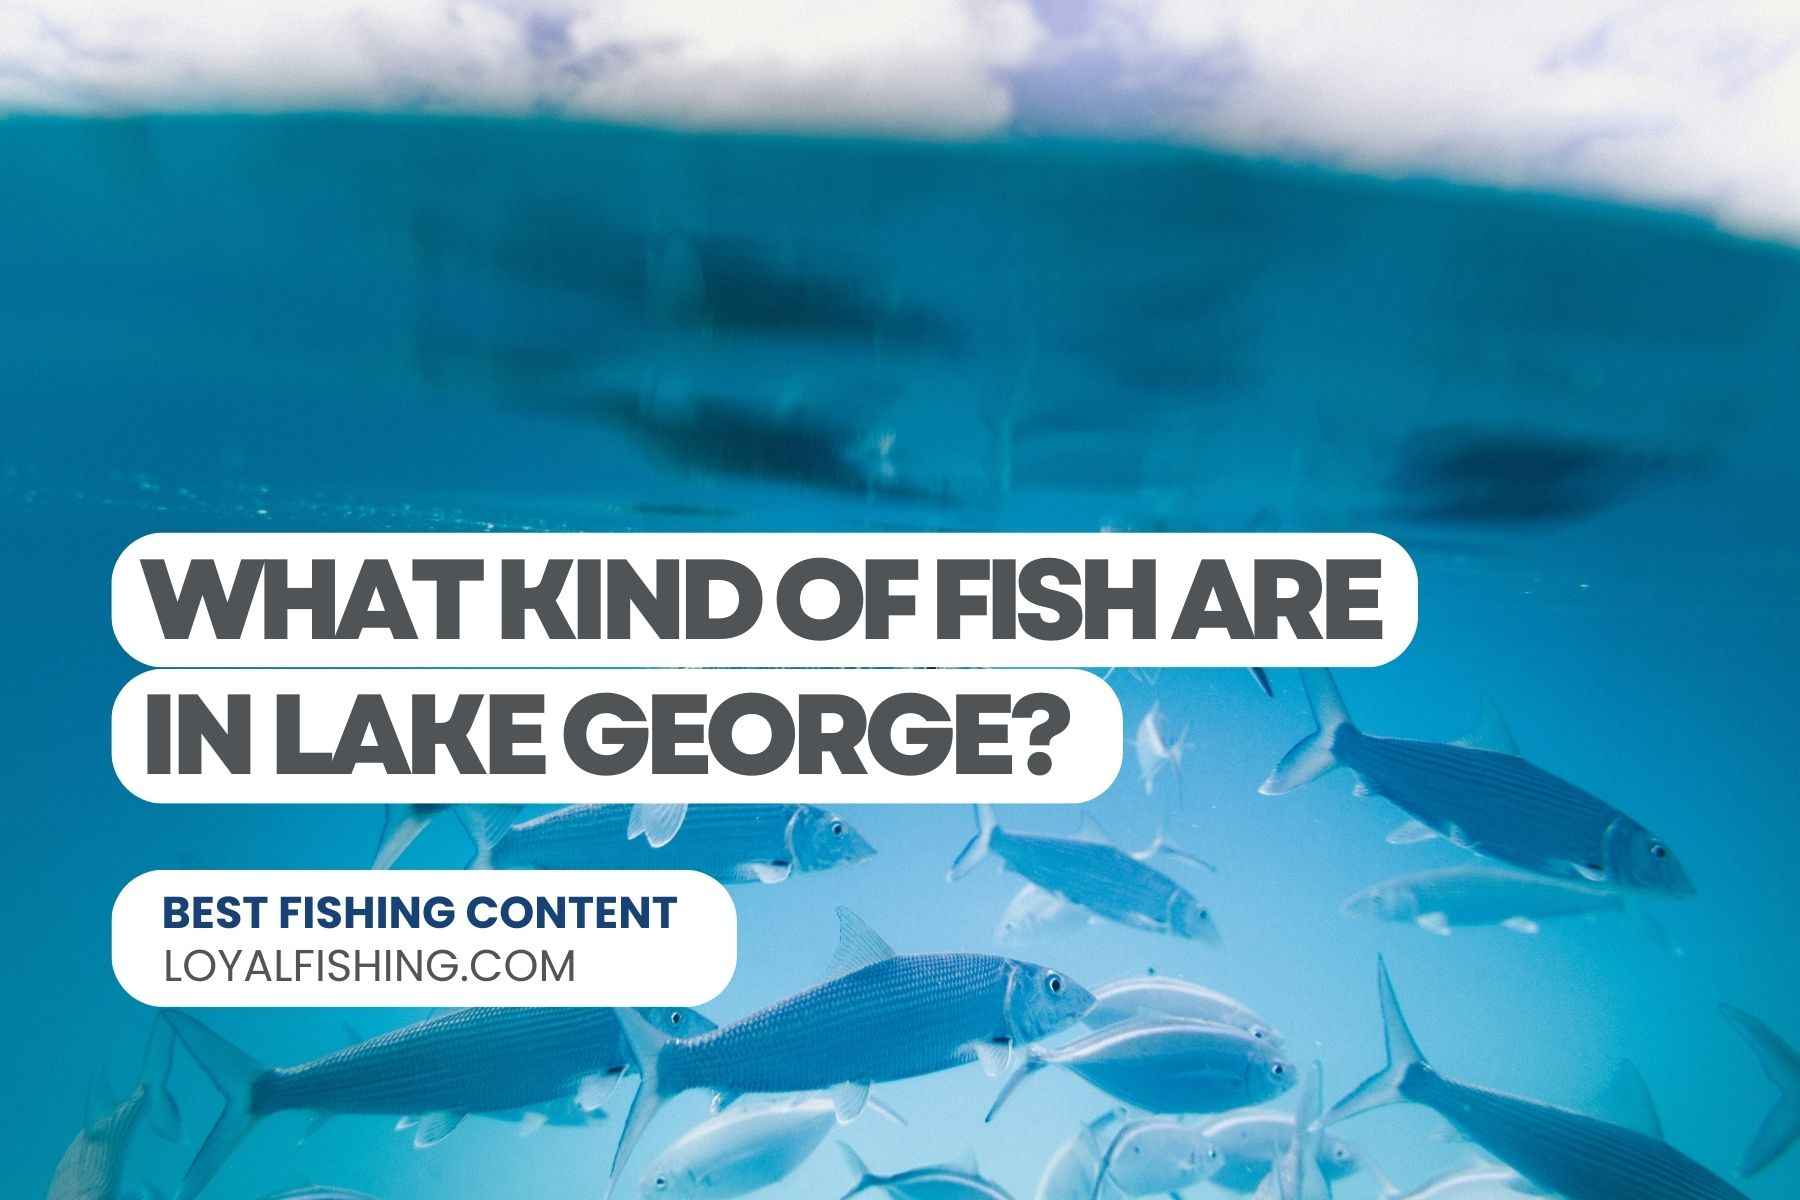 What Kind of Fish are in Lake George?